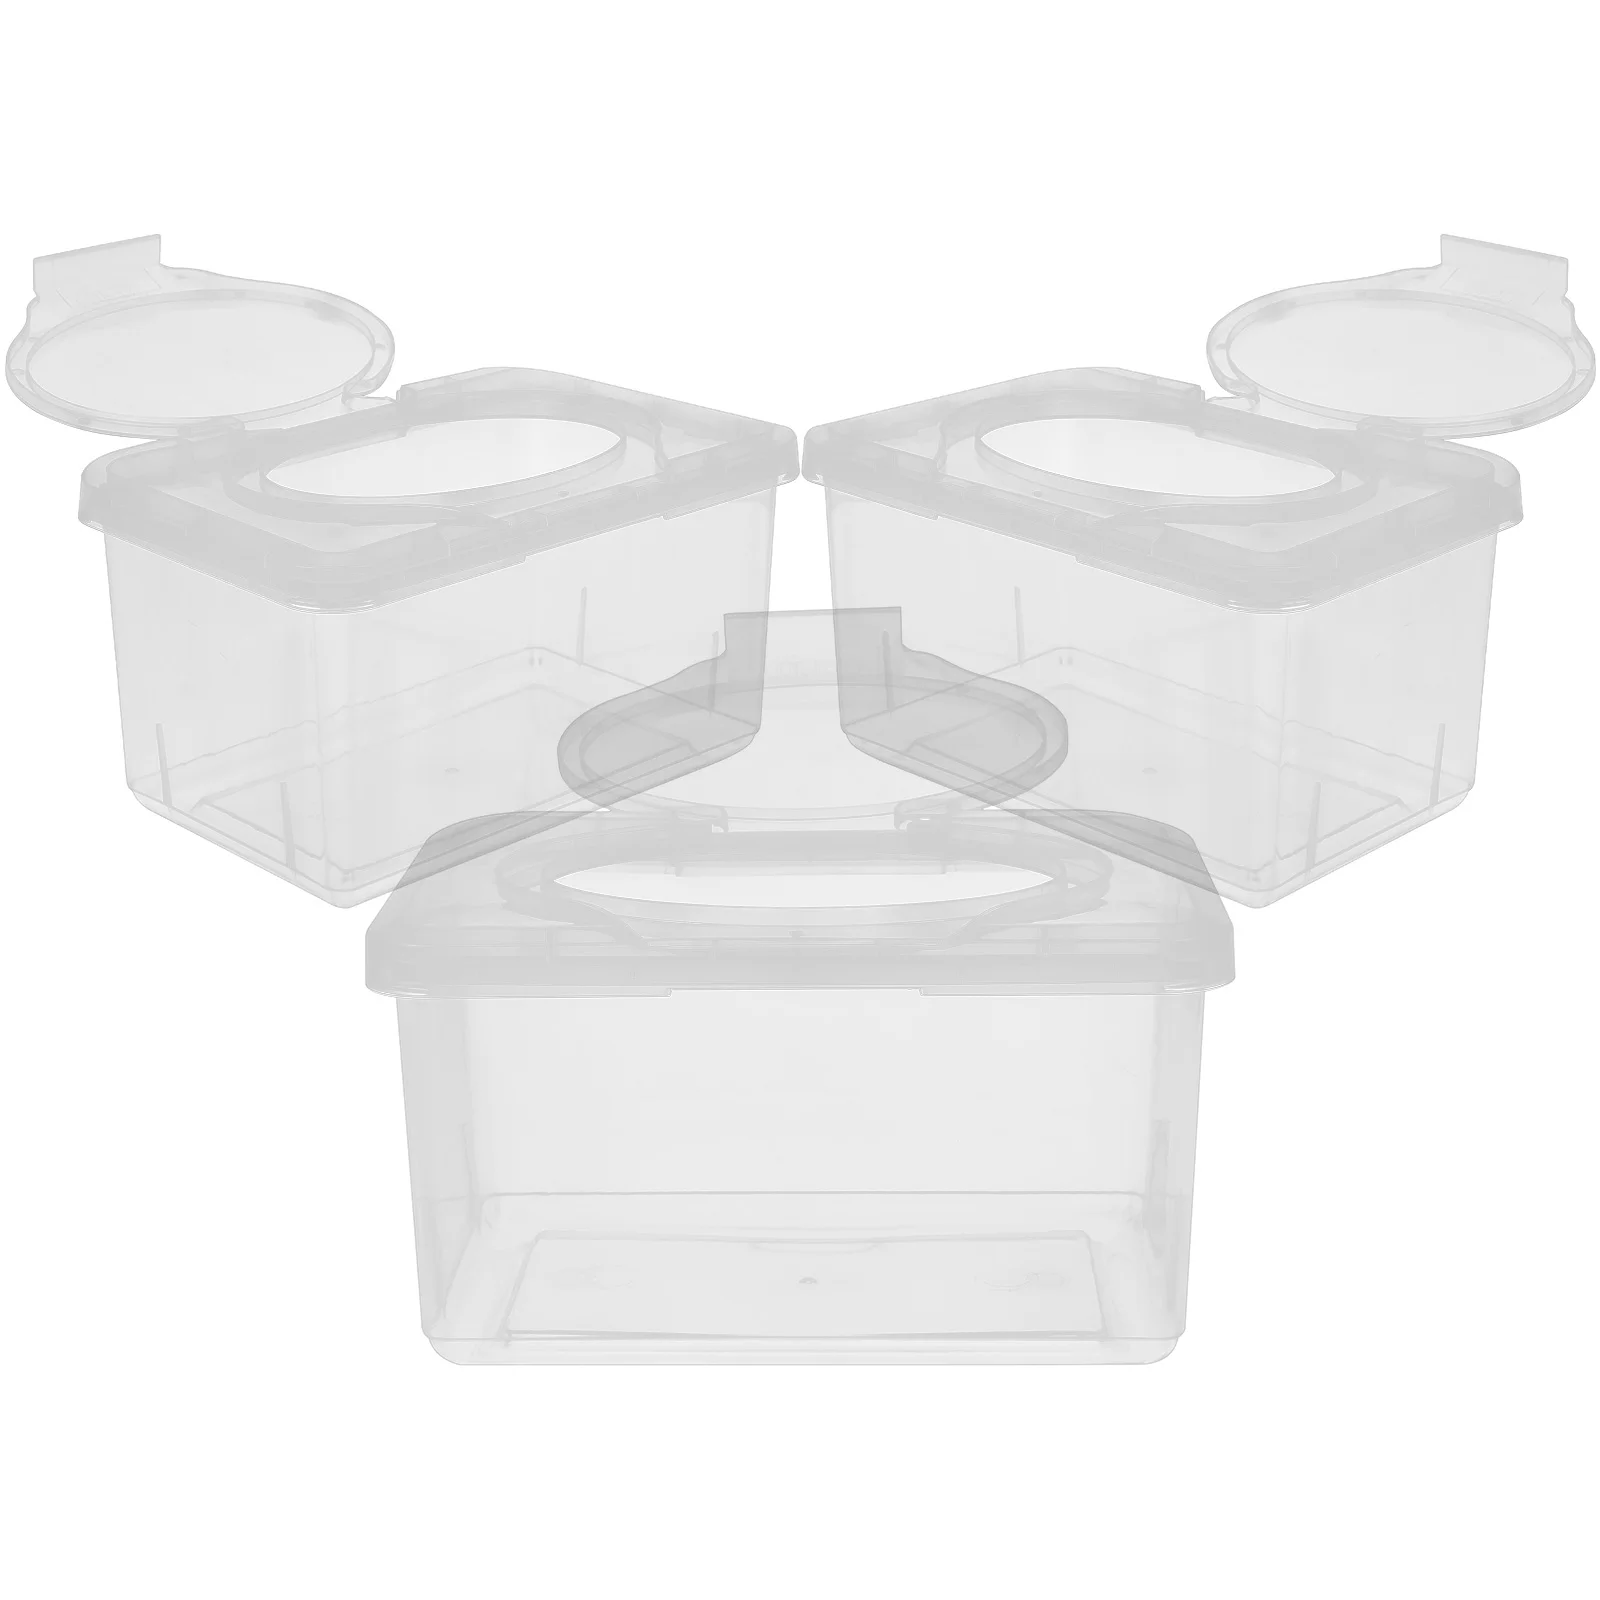 

3 Pcs Baby Diapers Wipes Box Small Tissue Case Wet Container Holder Automatic Infant Portable Dispensers